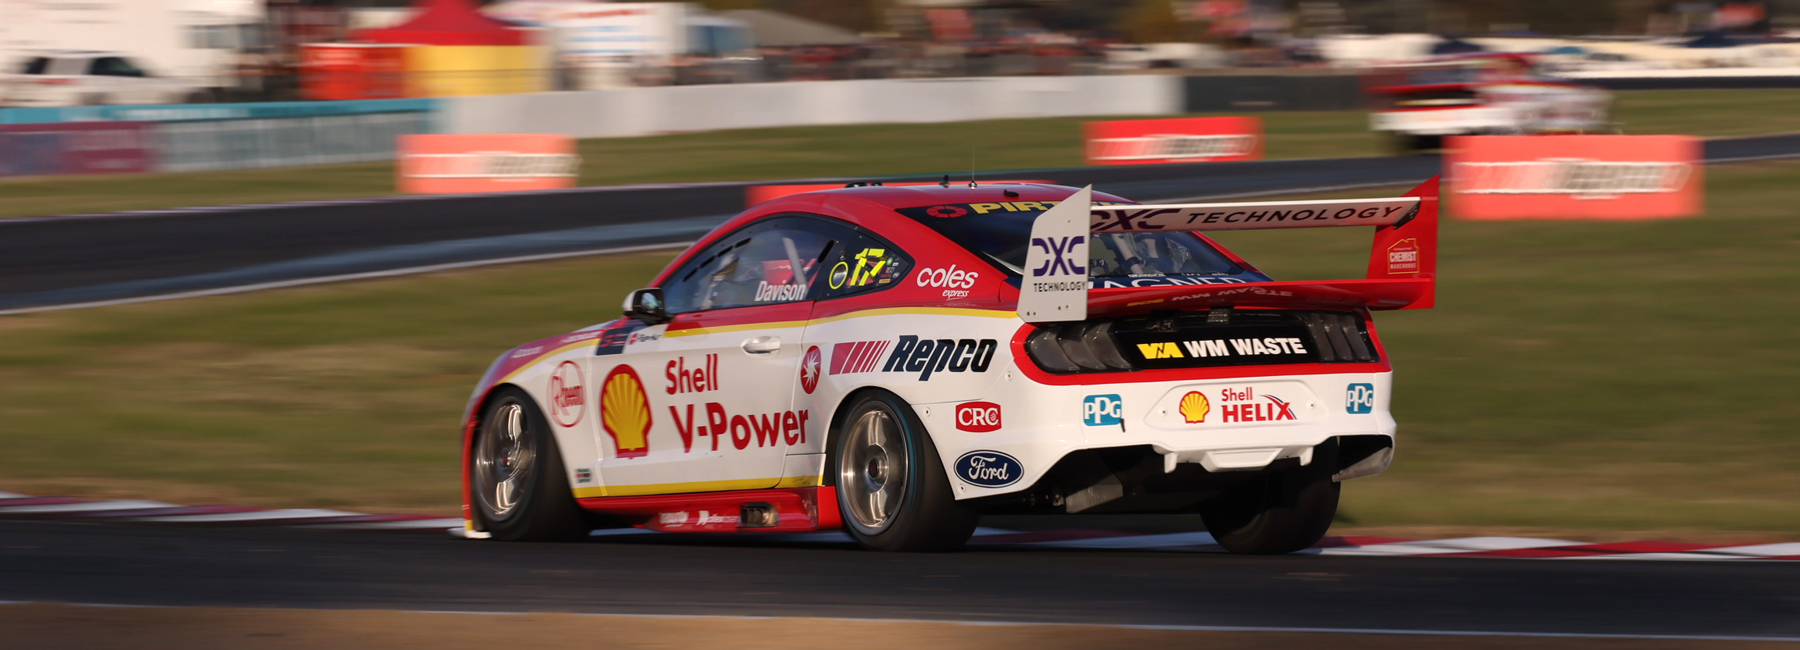 Shell V-Power Racing Team accelerates operational performance and workplace success